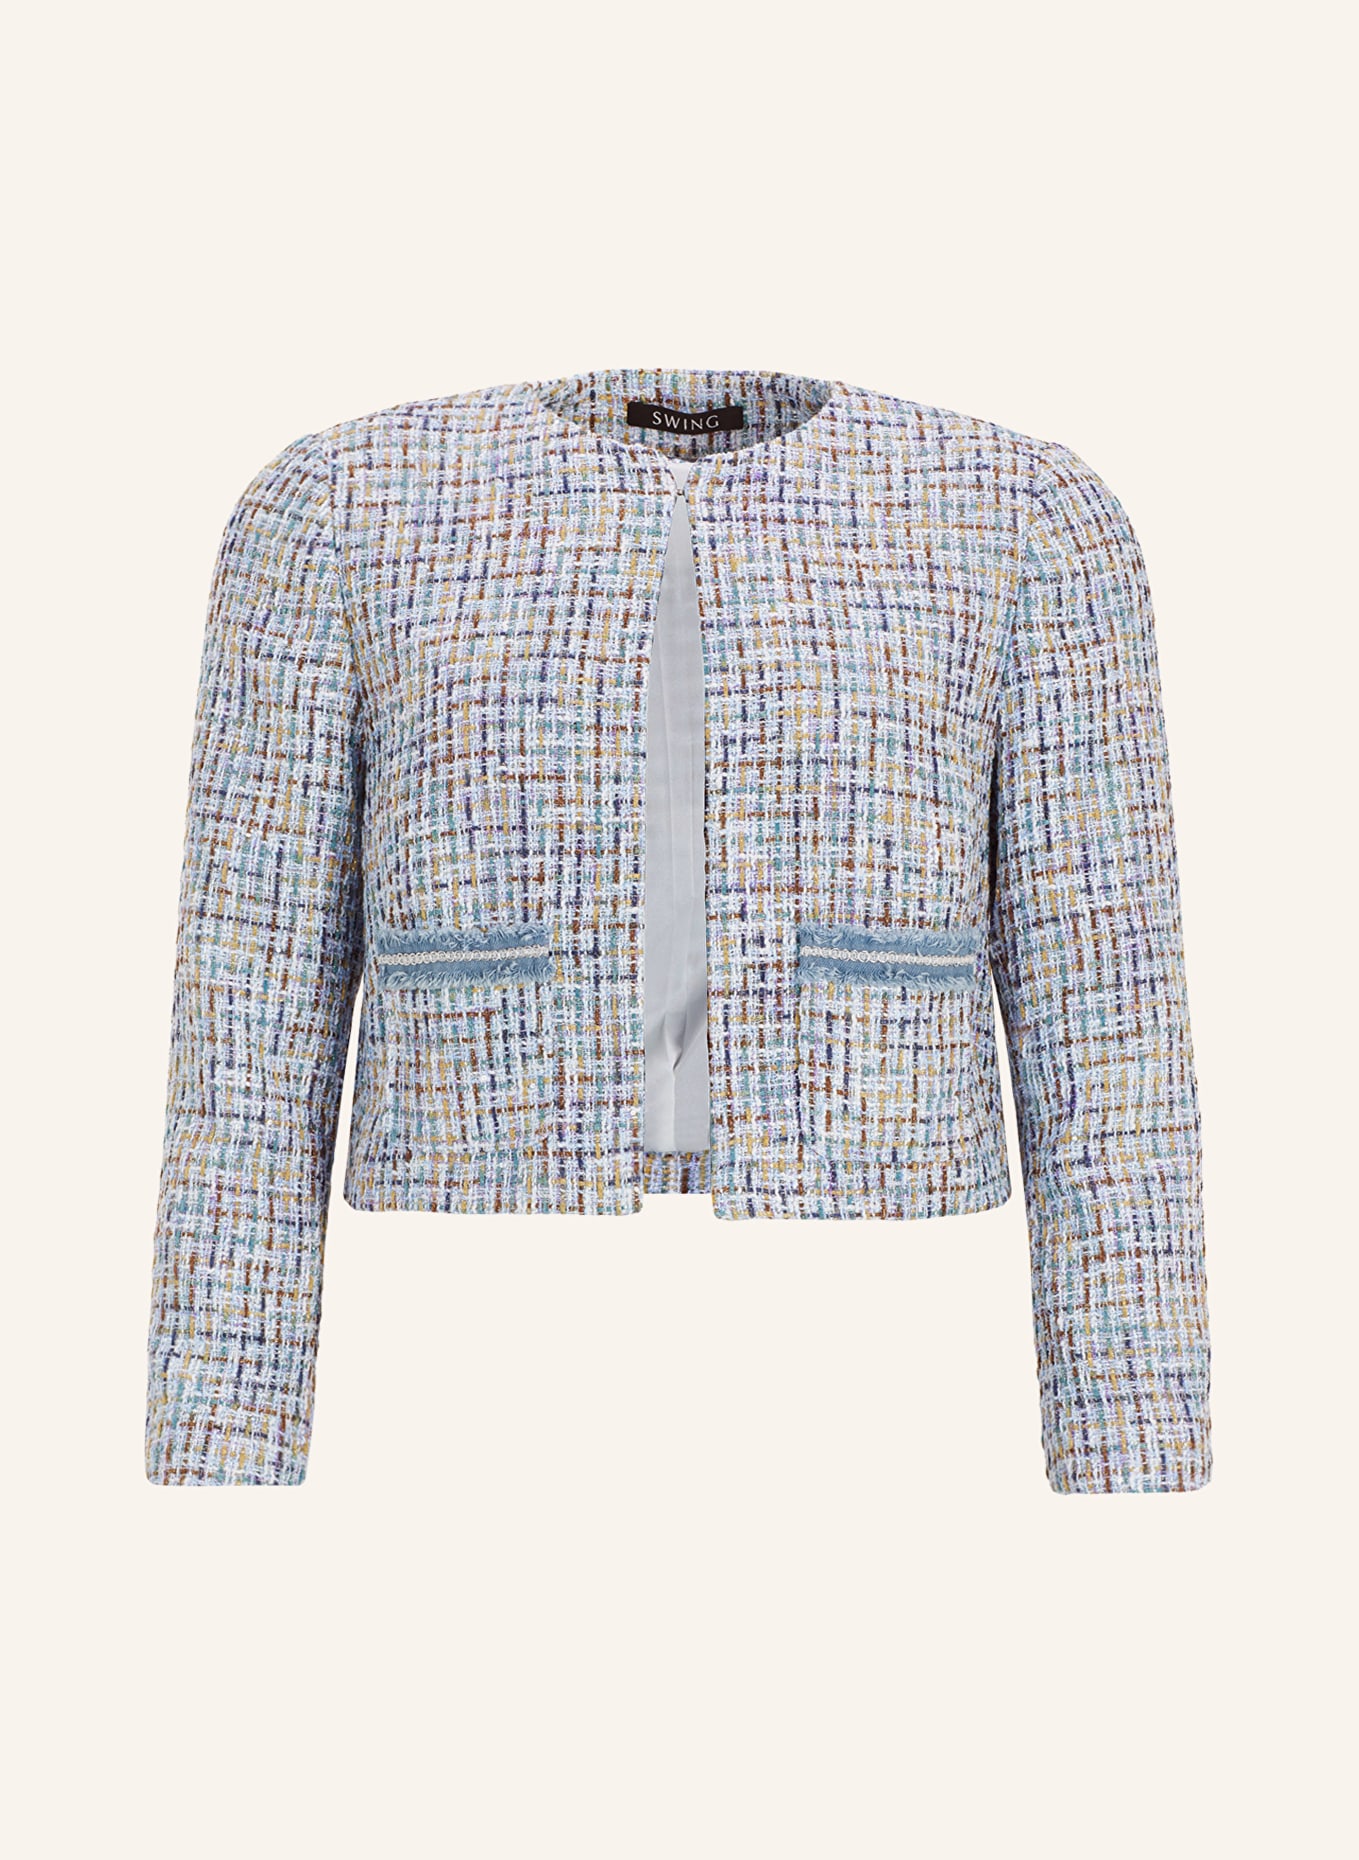 SWING Boxy jacket in tweed, Color: BLUE/ WHITE/ YELLOW (Image 1)